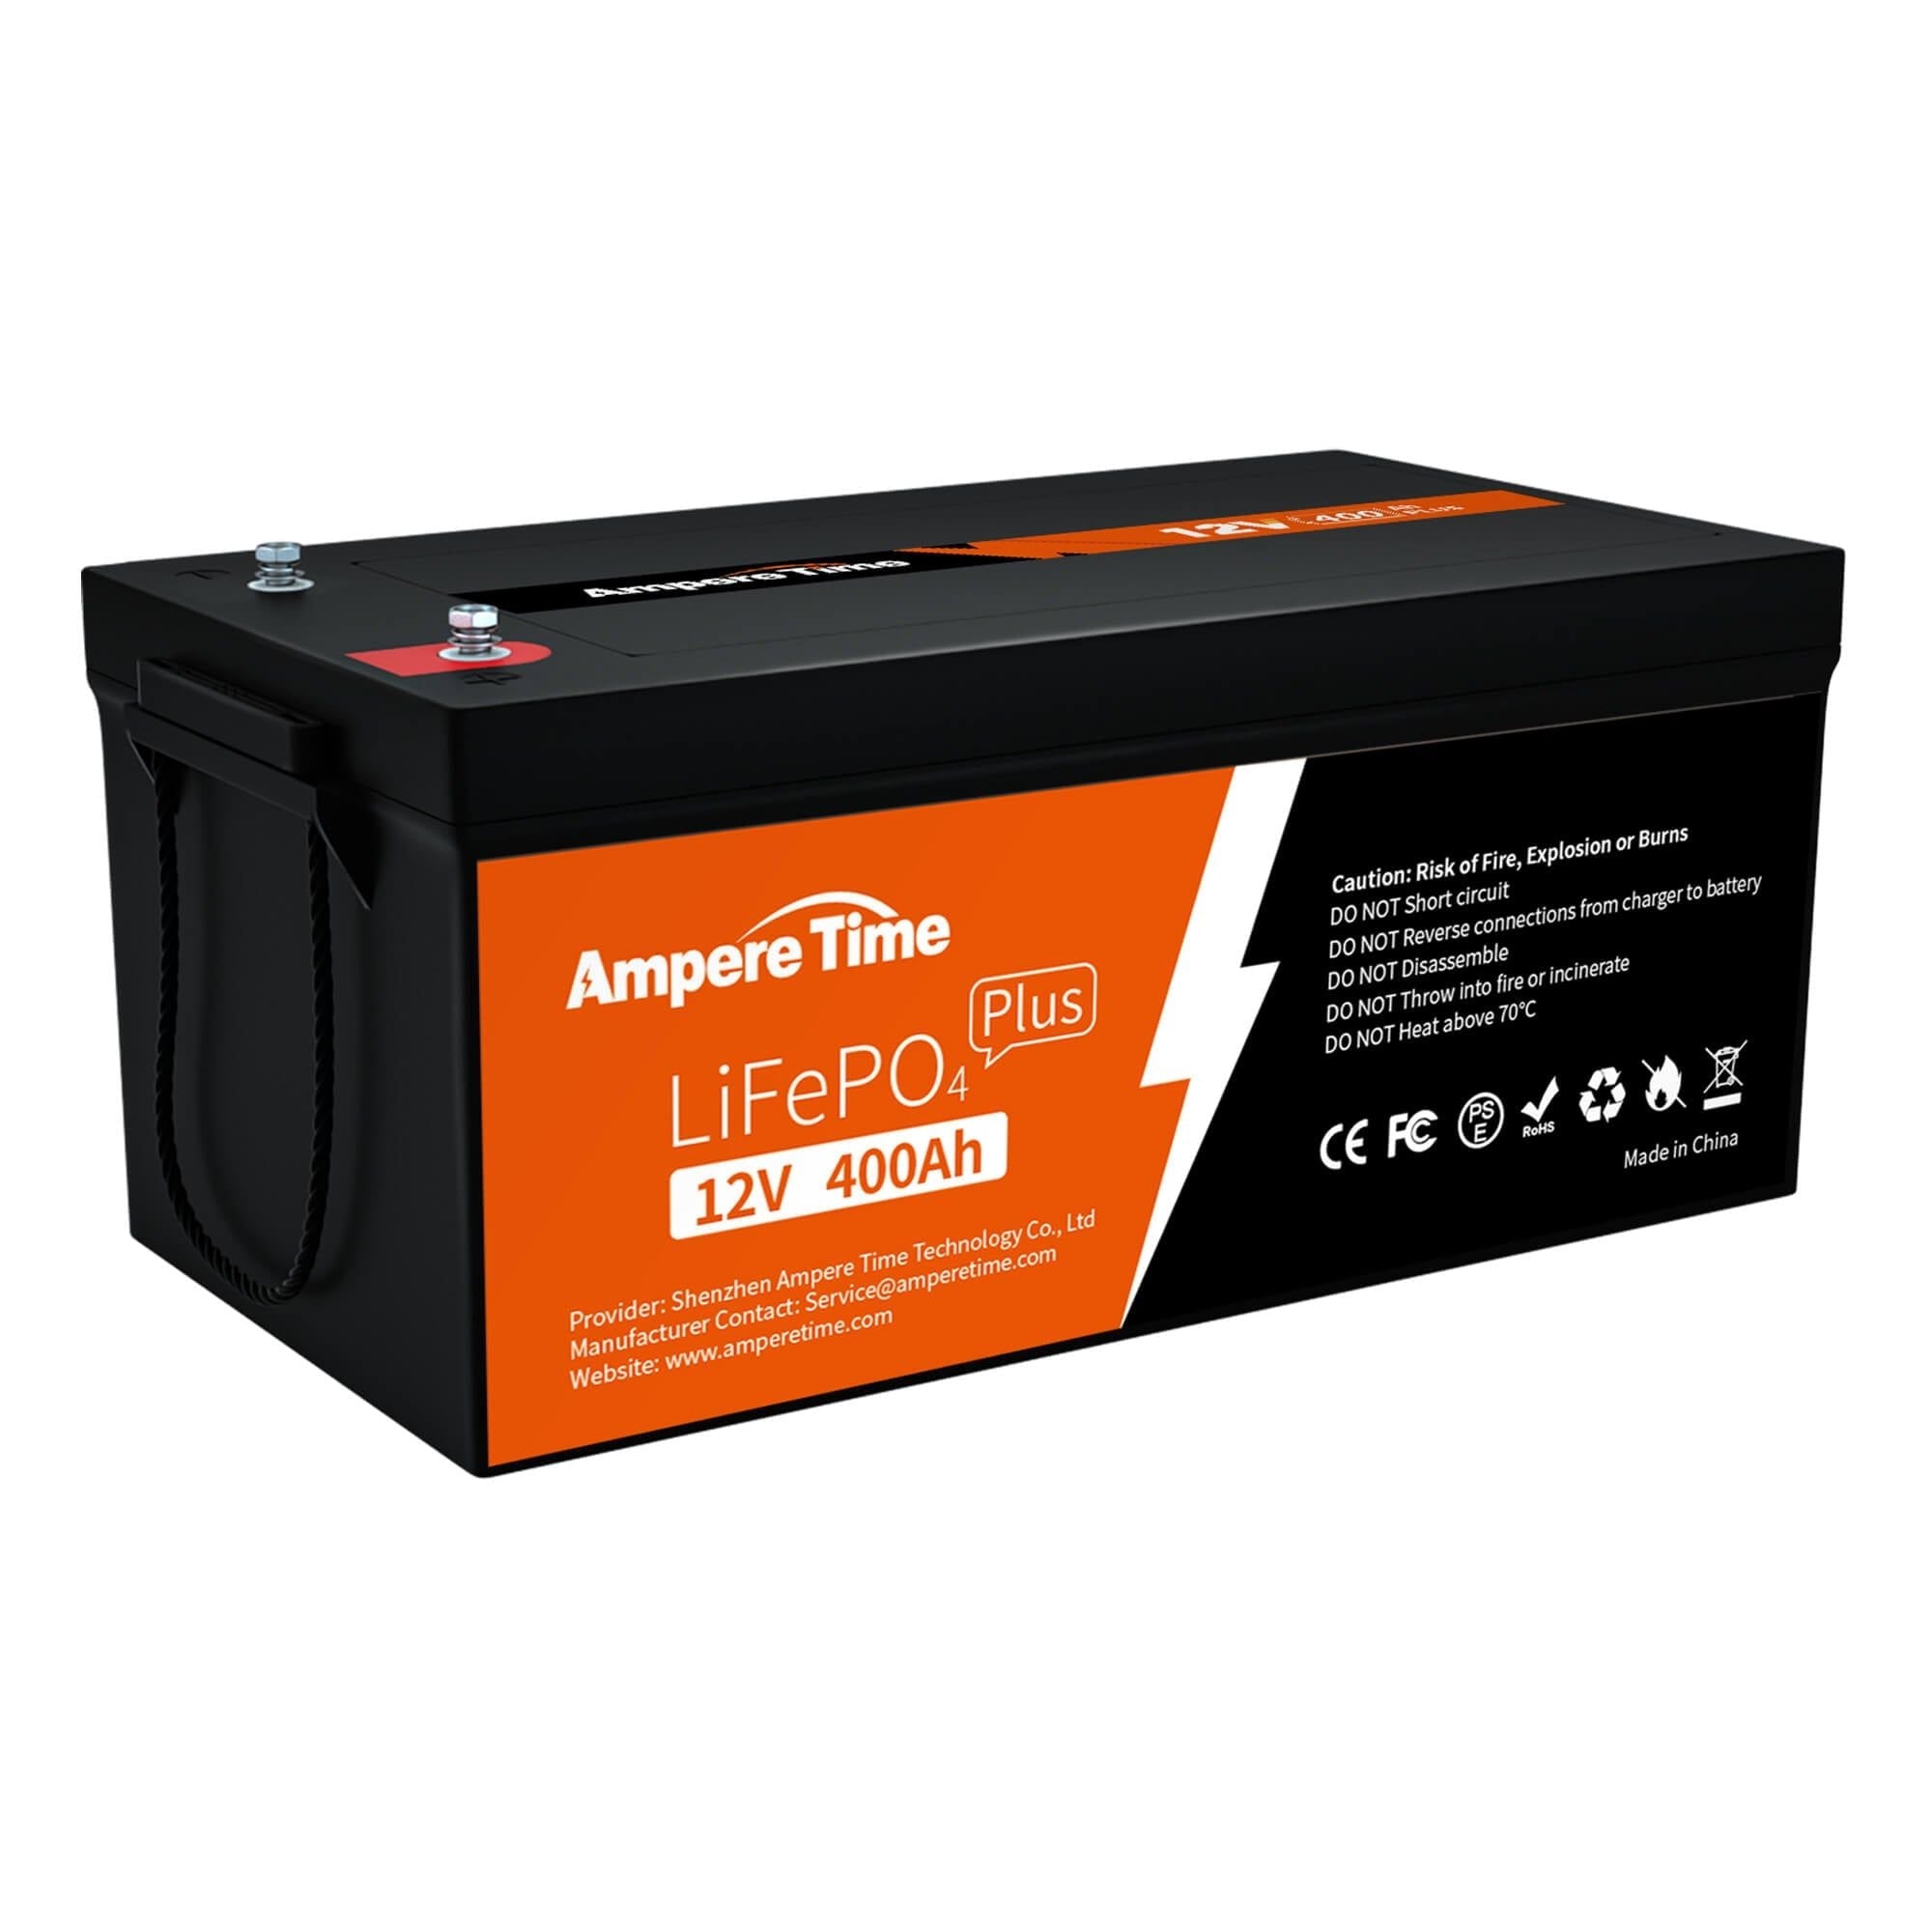 Ampere Time 12V 400Ah Lithium LiFePO4 Battery Ampere Time